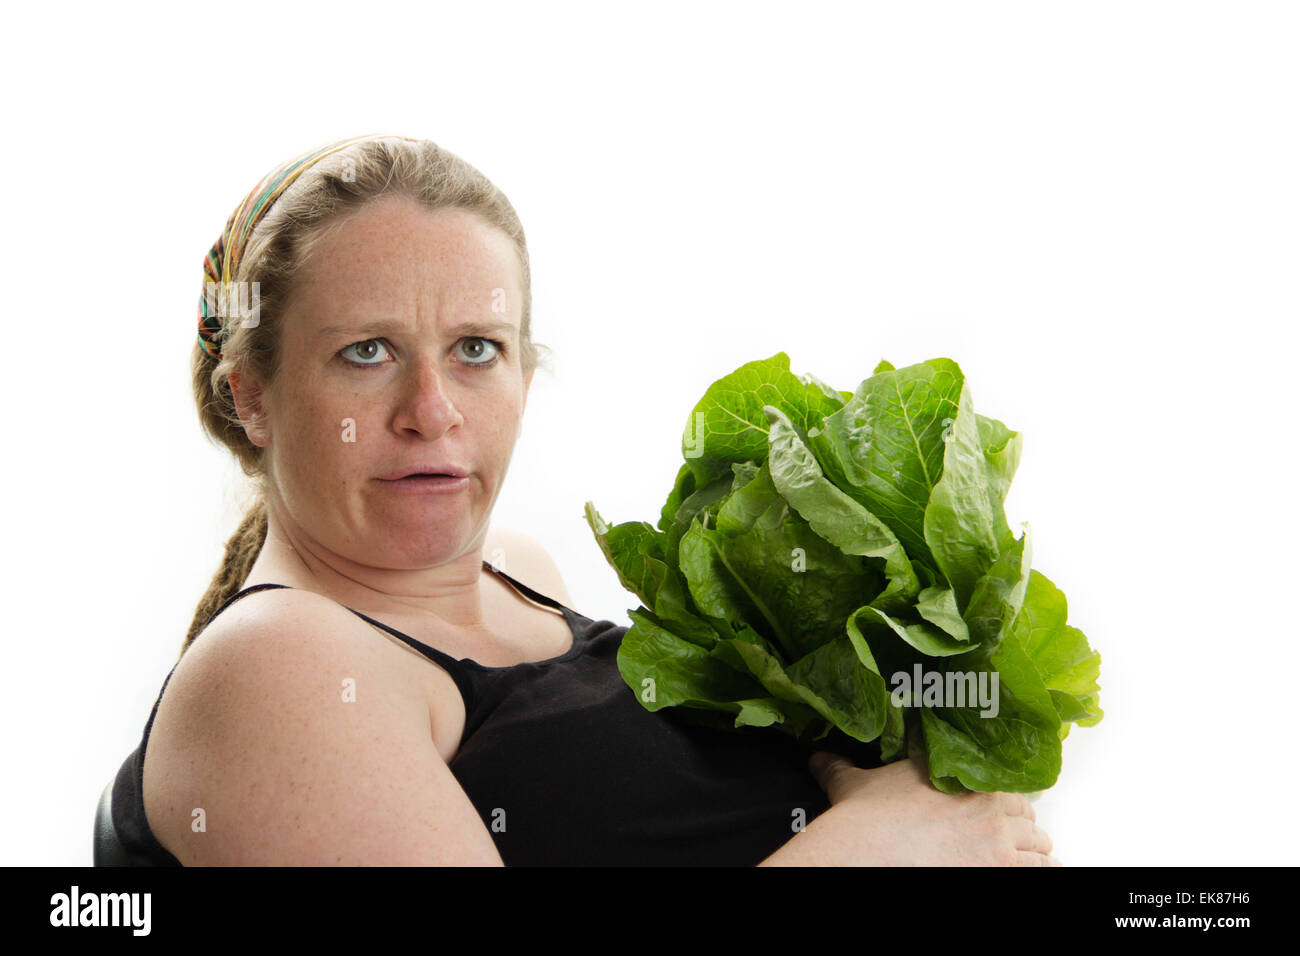 big pregnant woman silly face vegetables Stock Photo